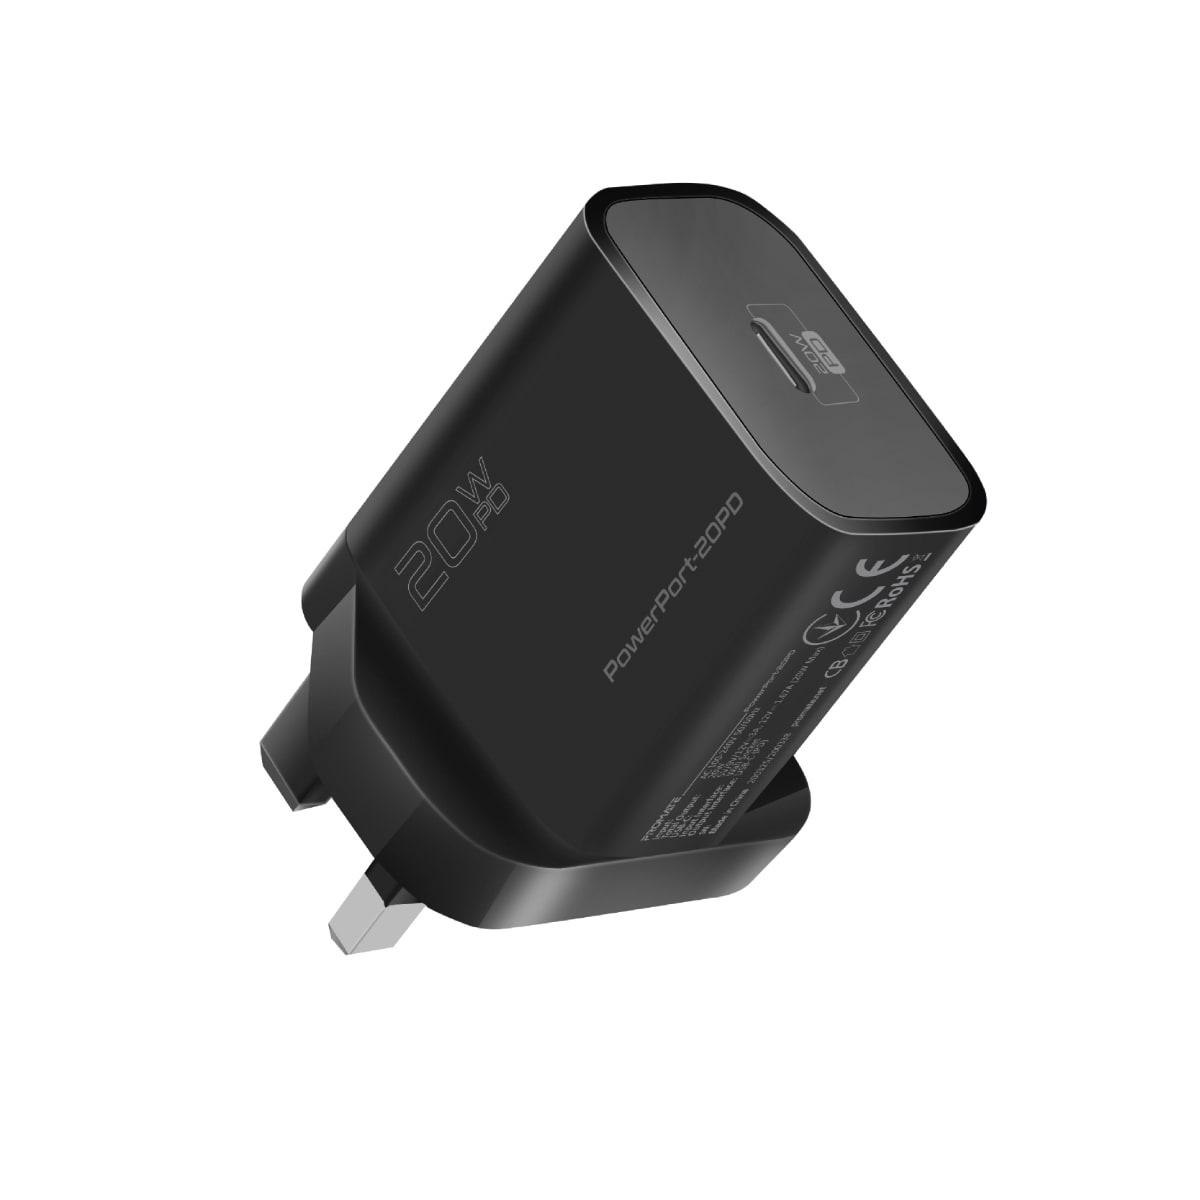 Buy Promate Usb C Power Delivery Wall Charger w Fast Charging Compact Power Adapter With Type C Power Delivery And Automatic Voltage Regulation For Iphone 12 12 Mini 12 Pro 12 Pro Max Galaxy Online Shop